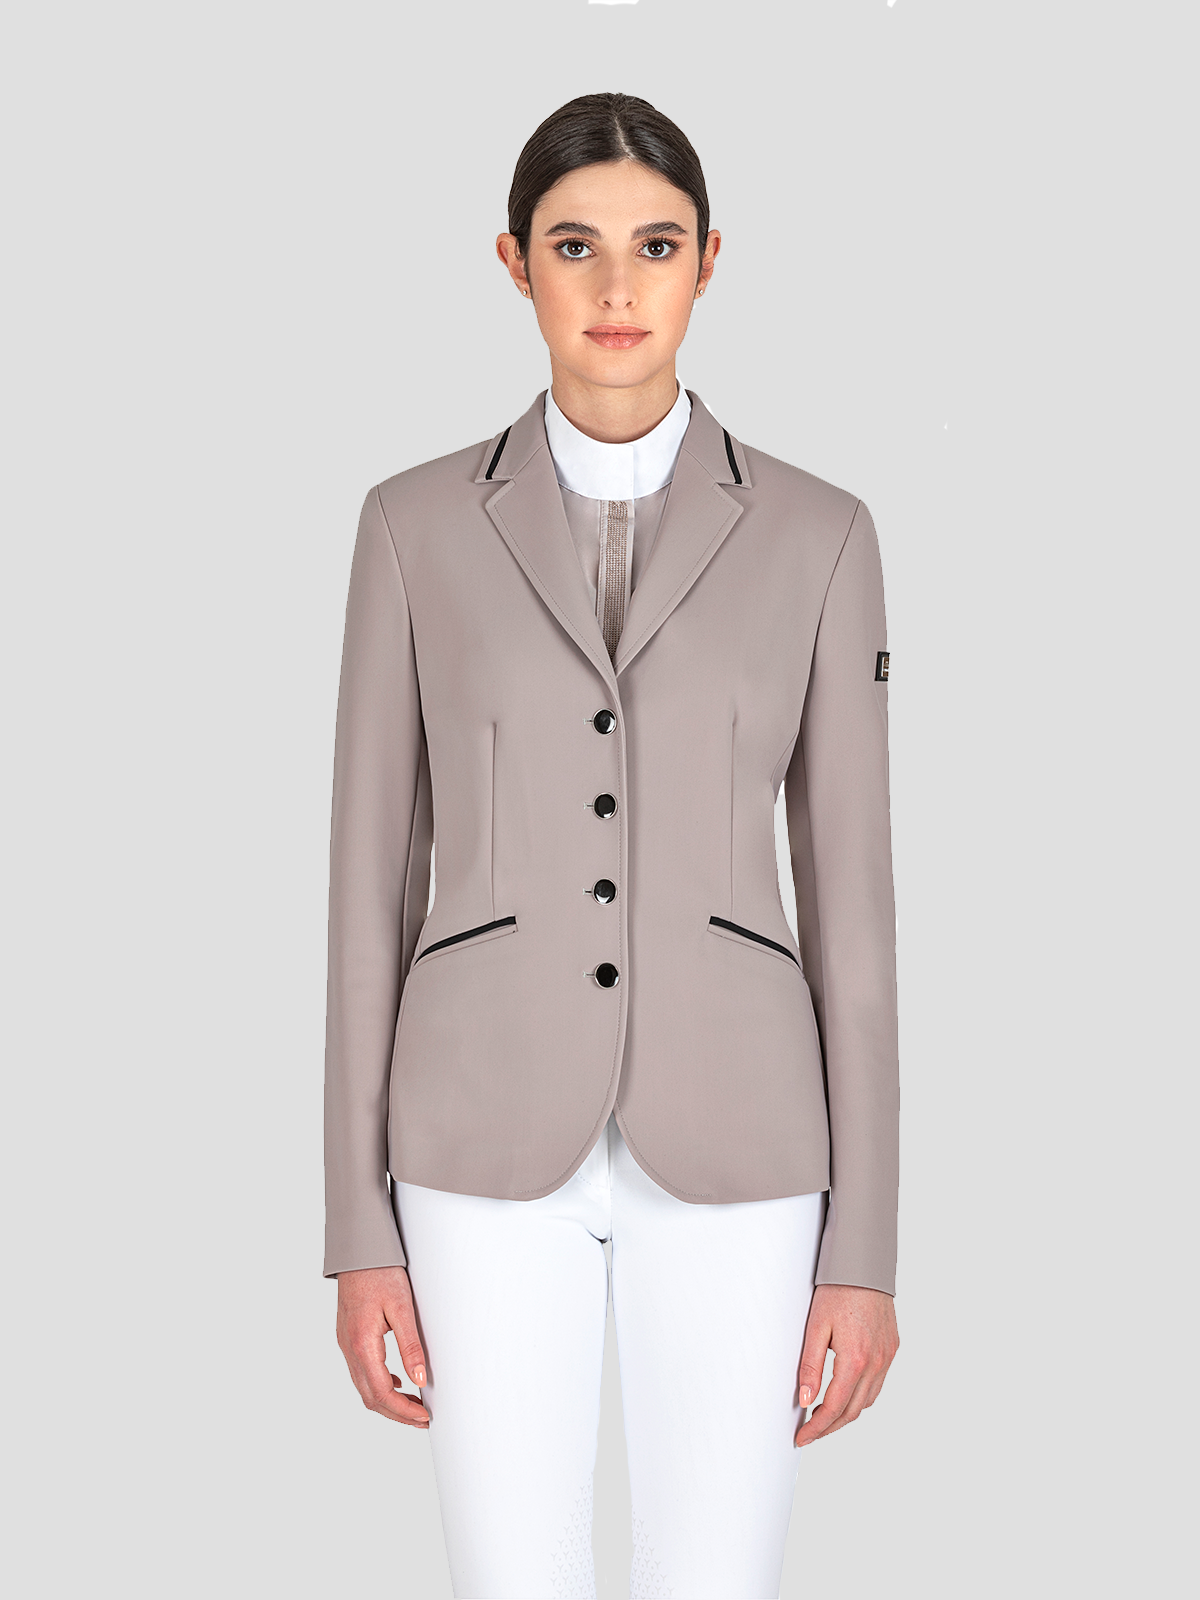 Efilez B-Move Light Women's Show Coat with UV Protection - rear view